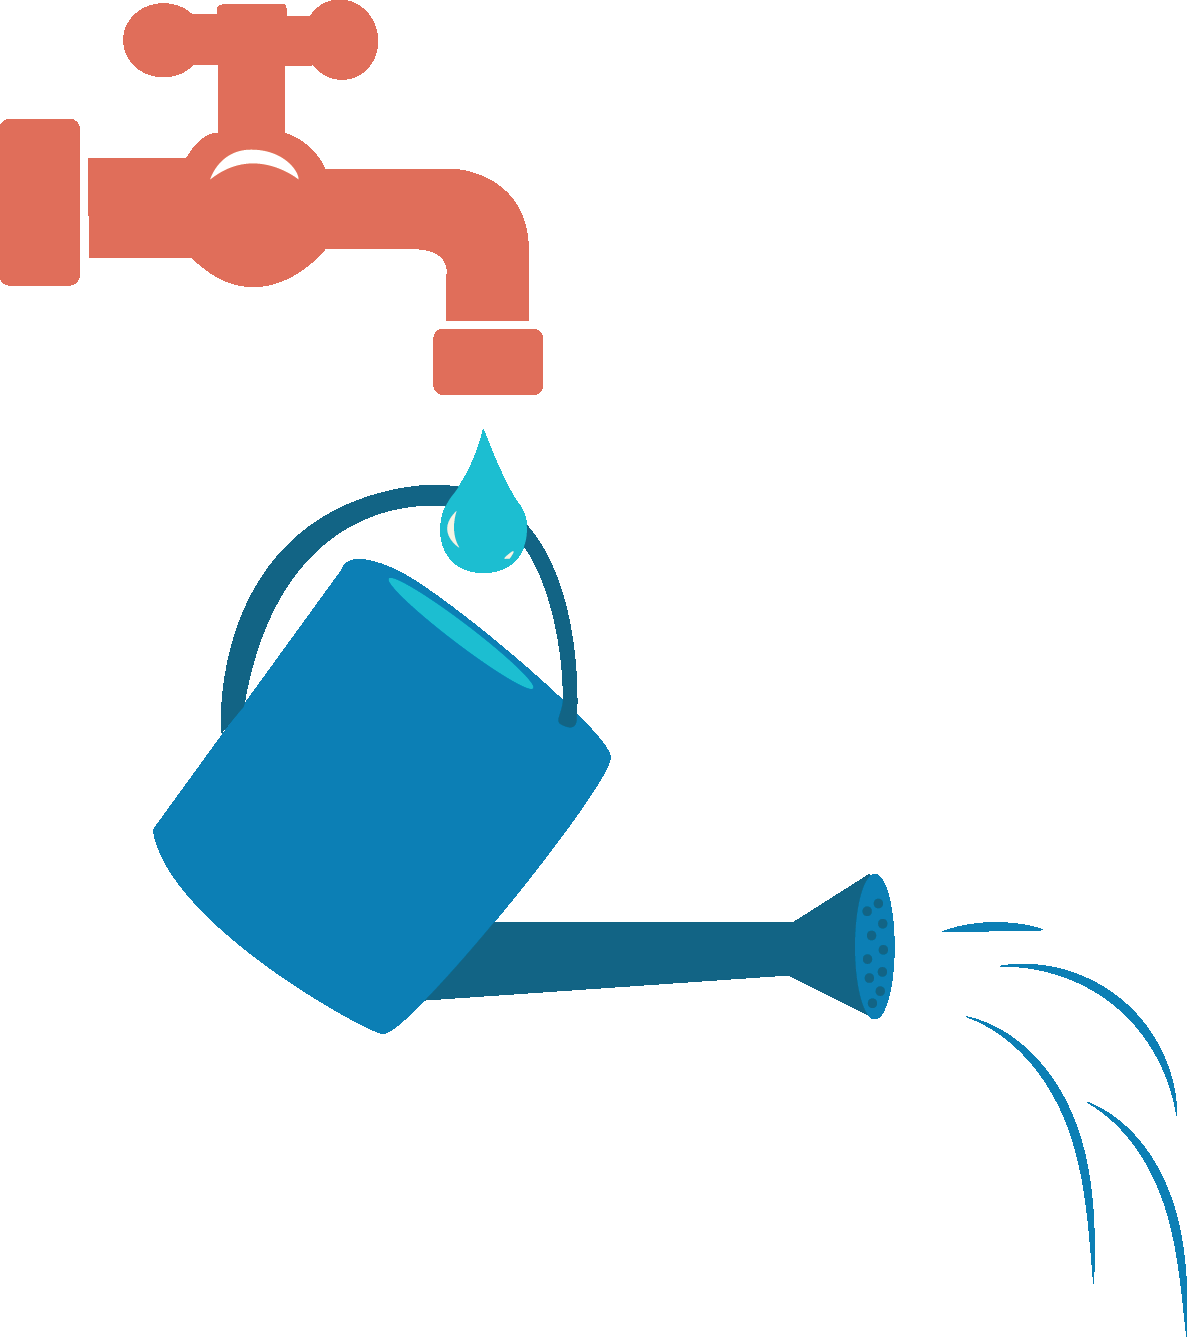 Save water png transparent. Wet clipart toothbrush